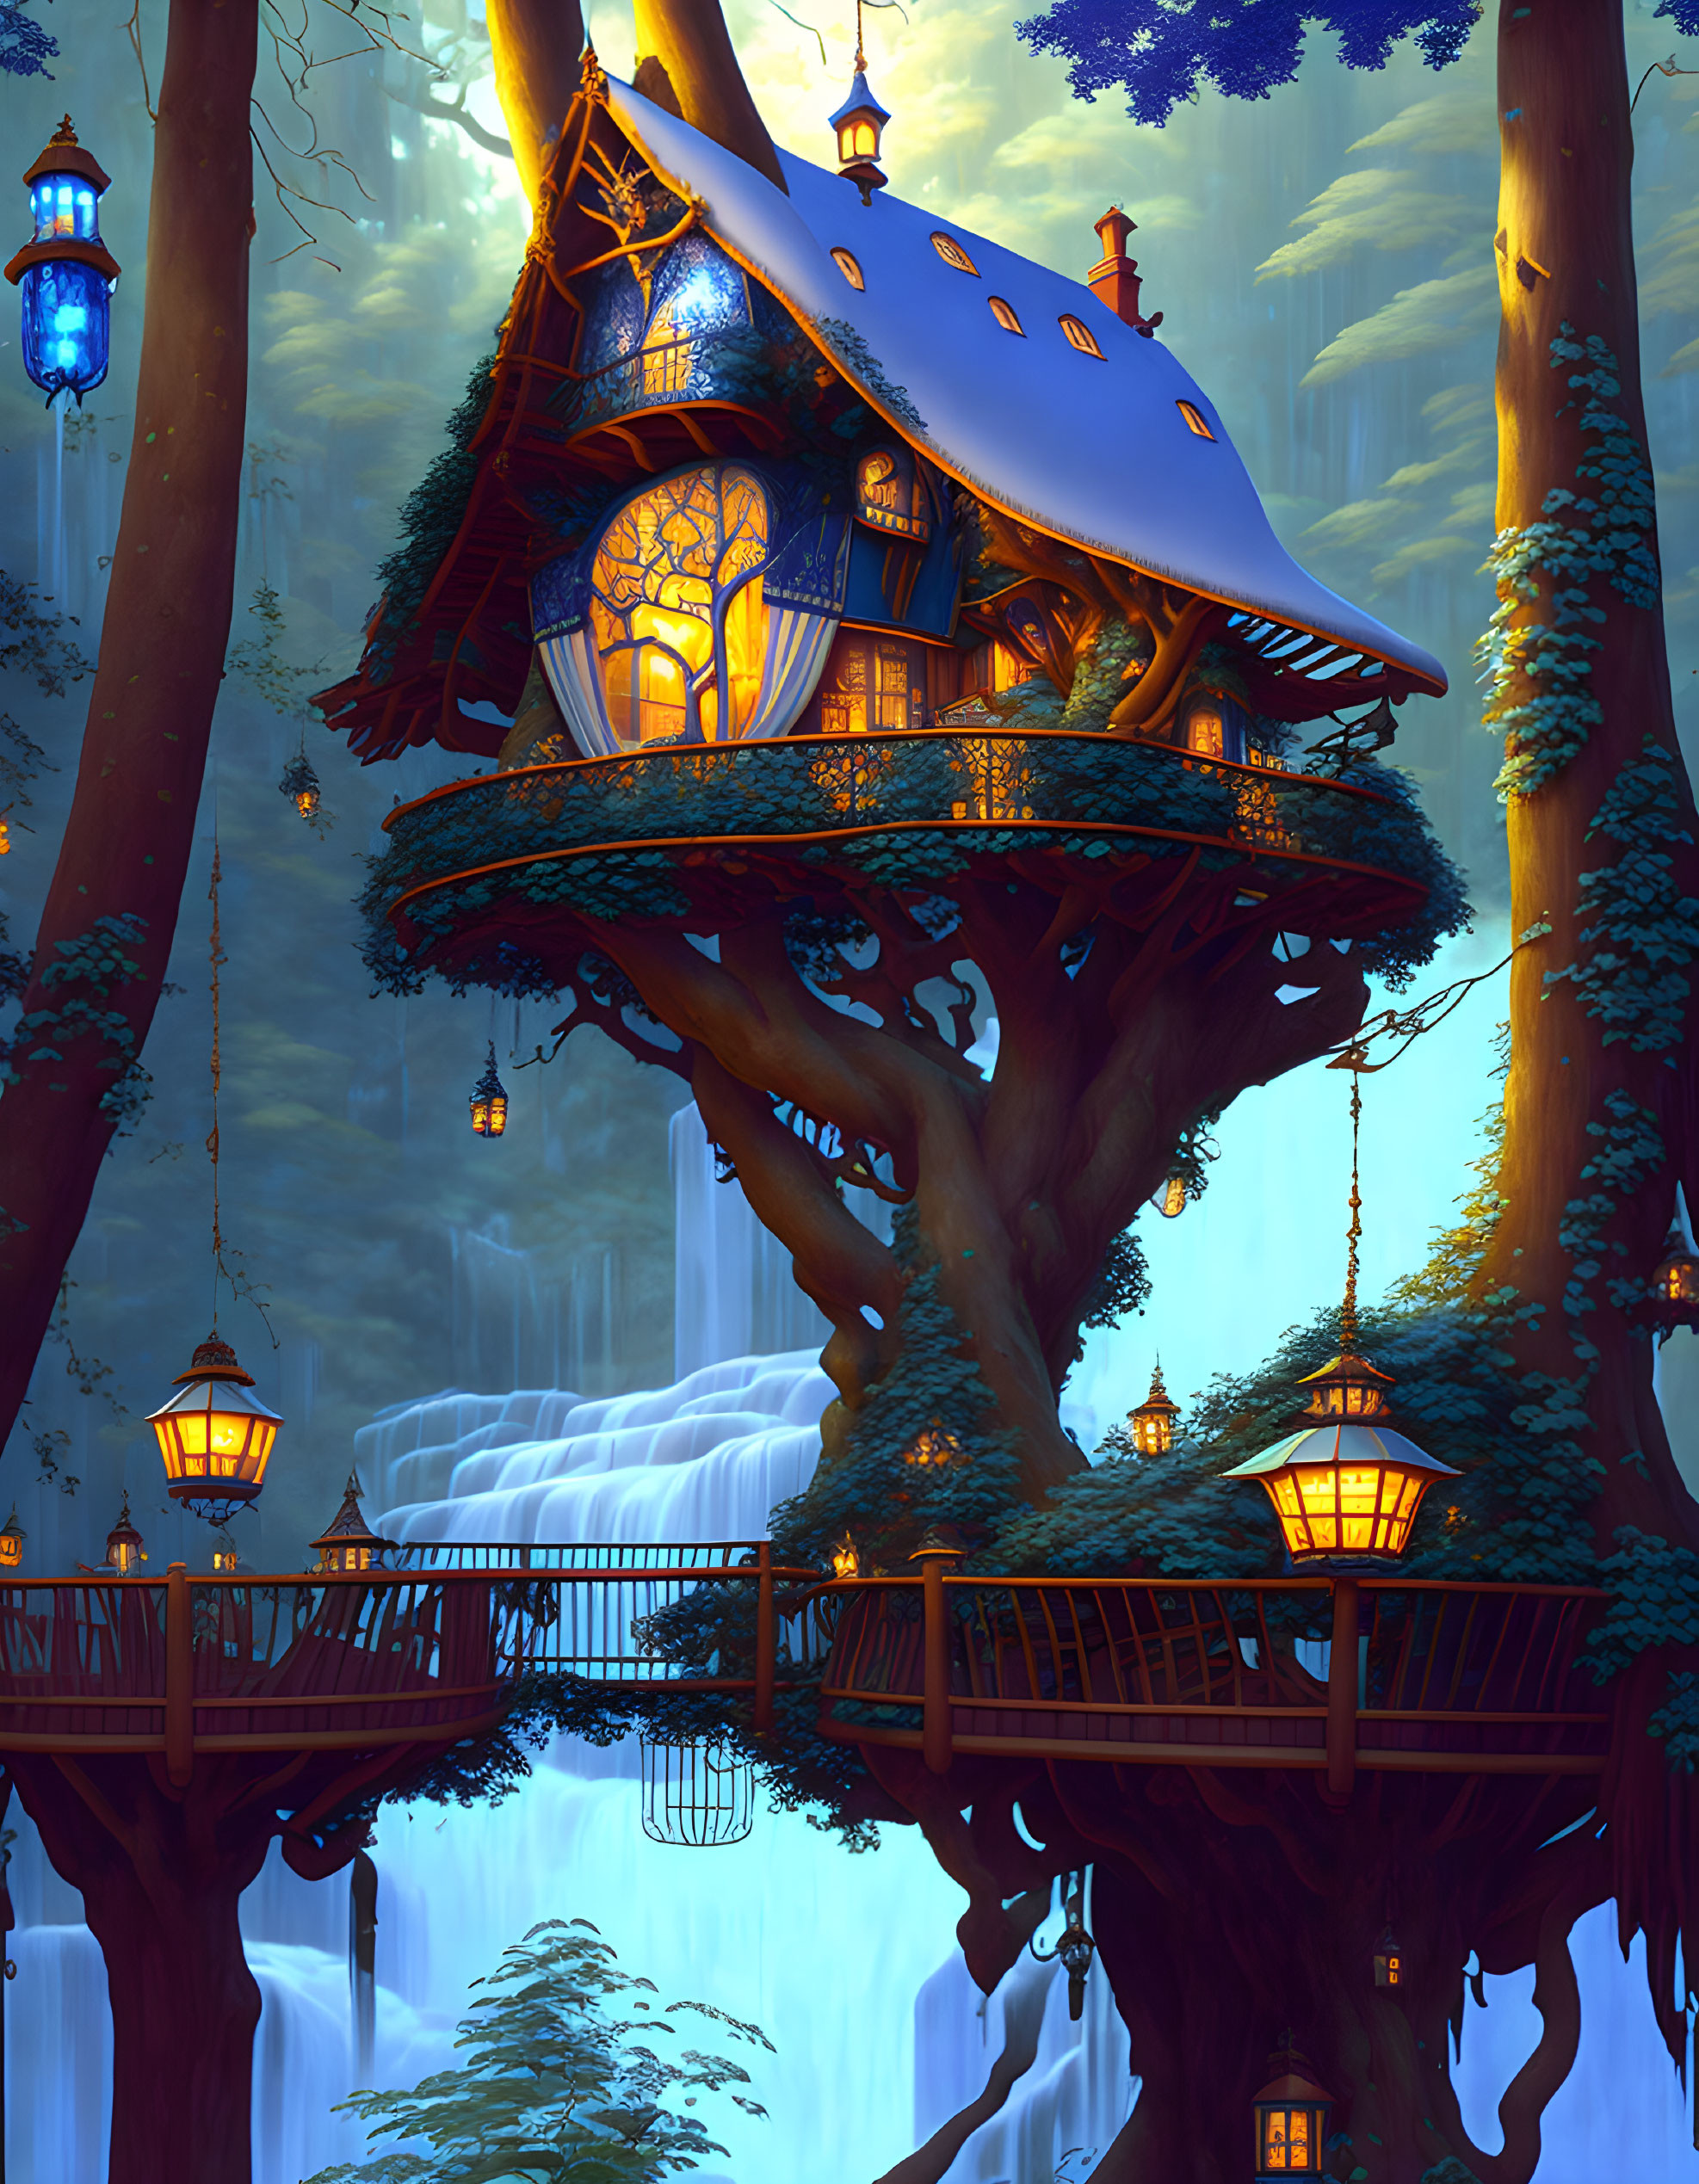 Enchanting treehouse with blue roof in forest with waterfall & lanterns